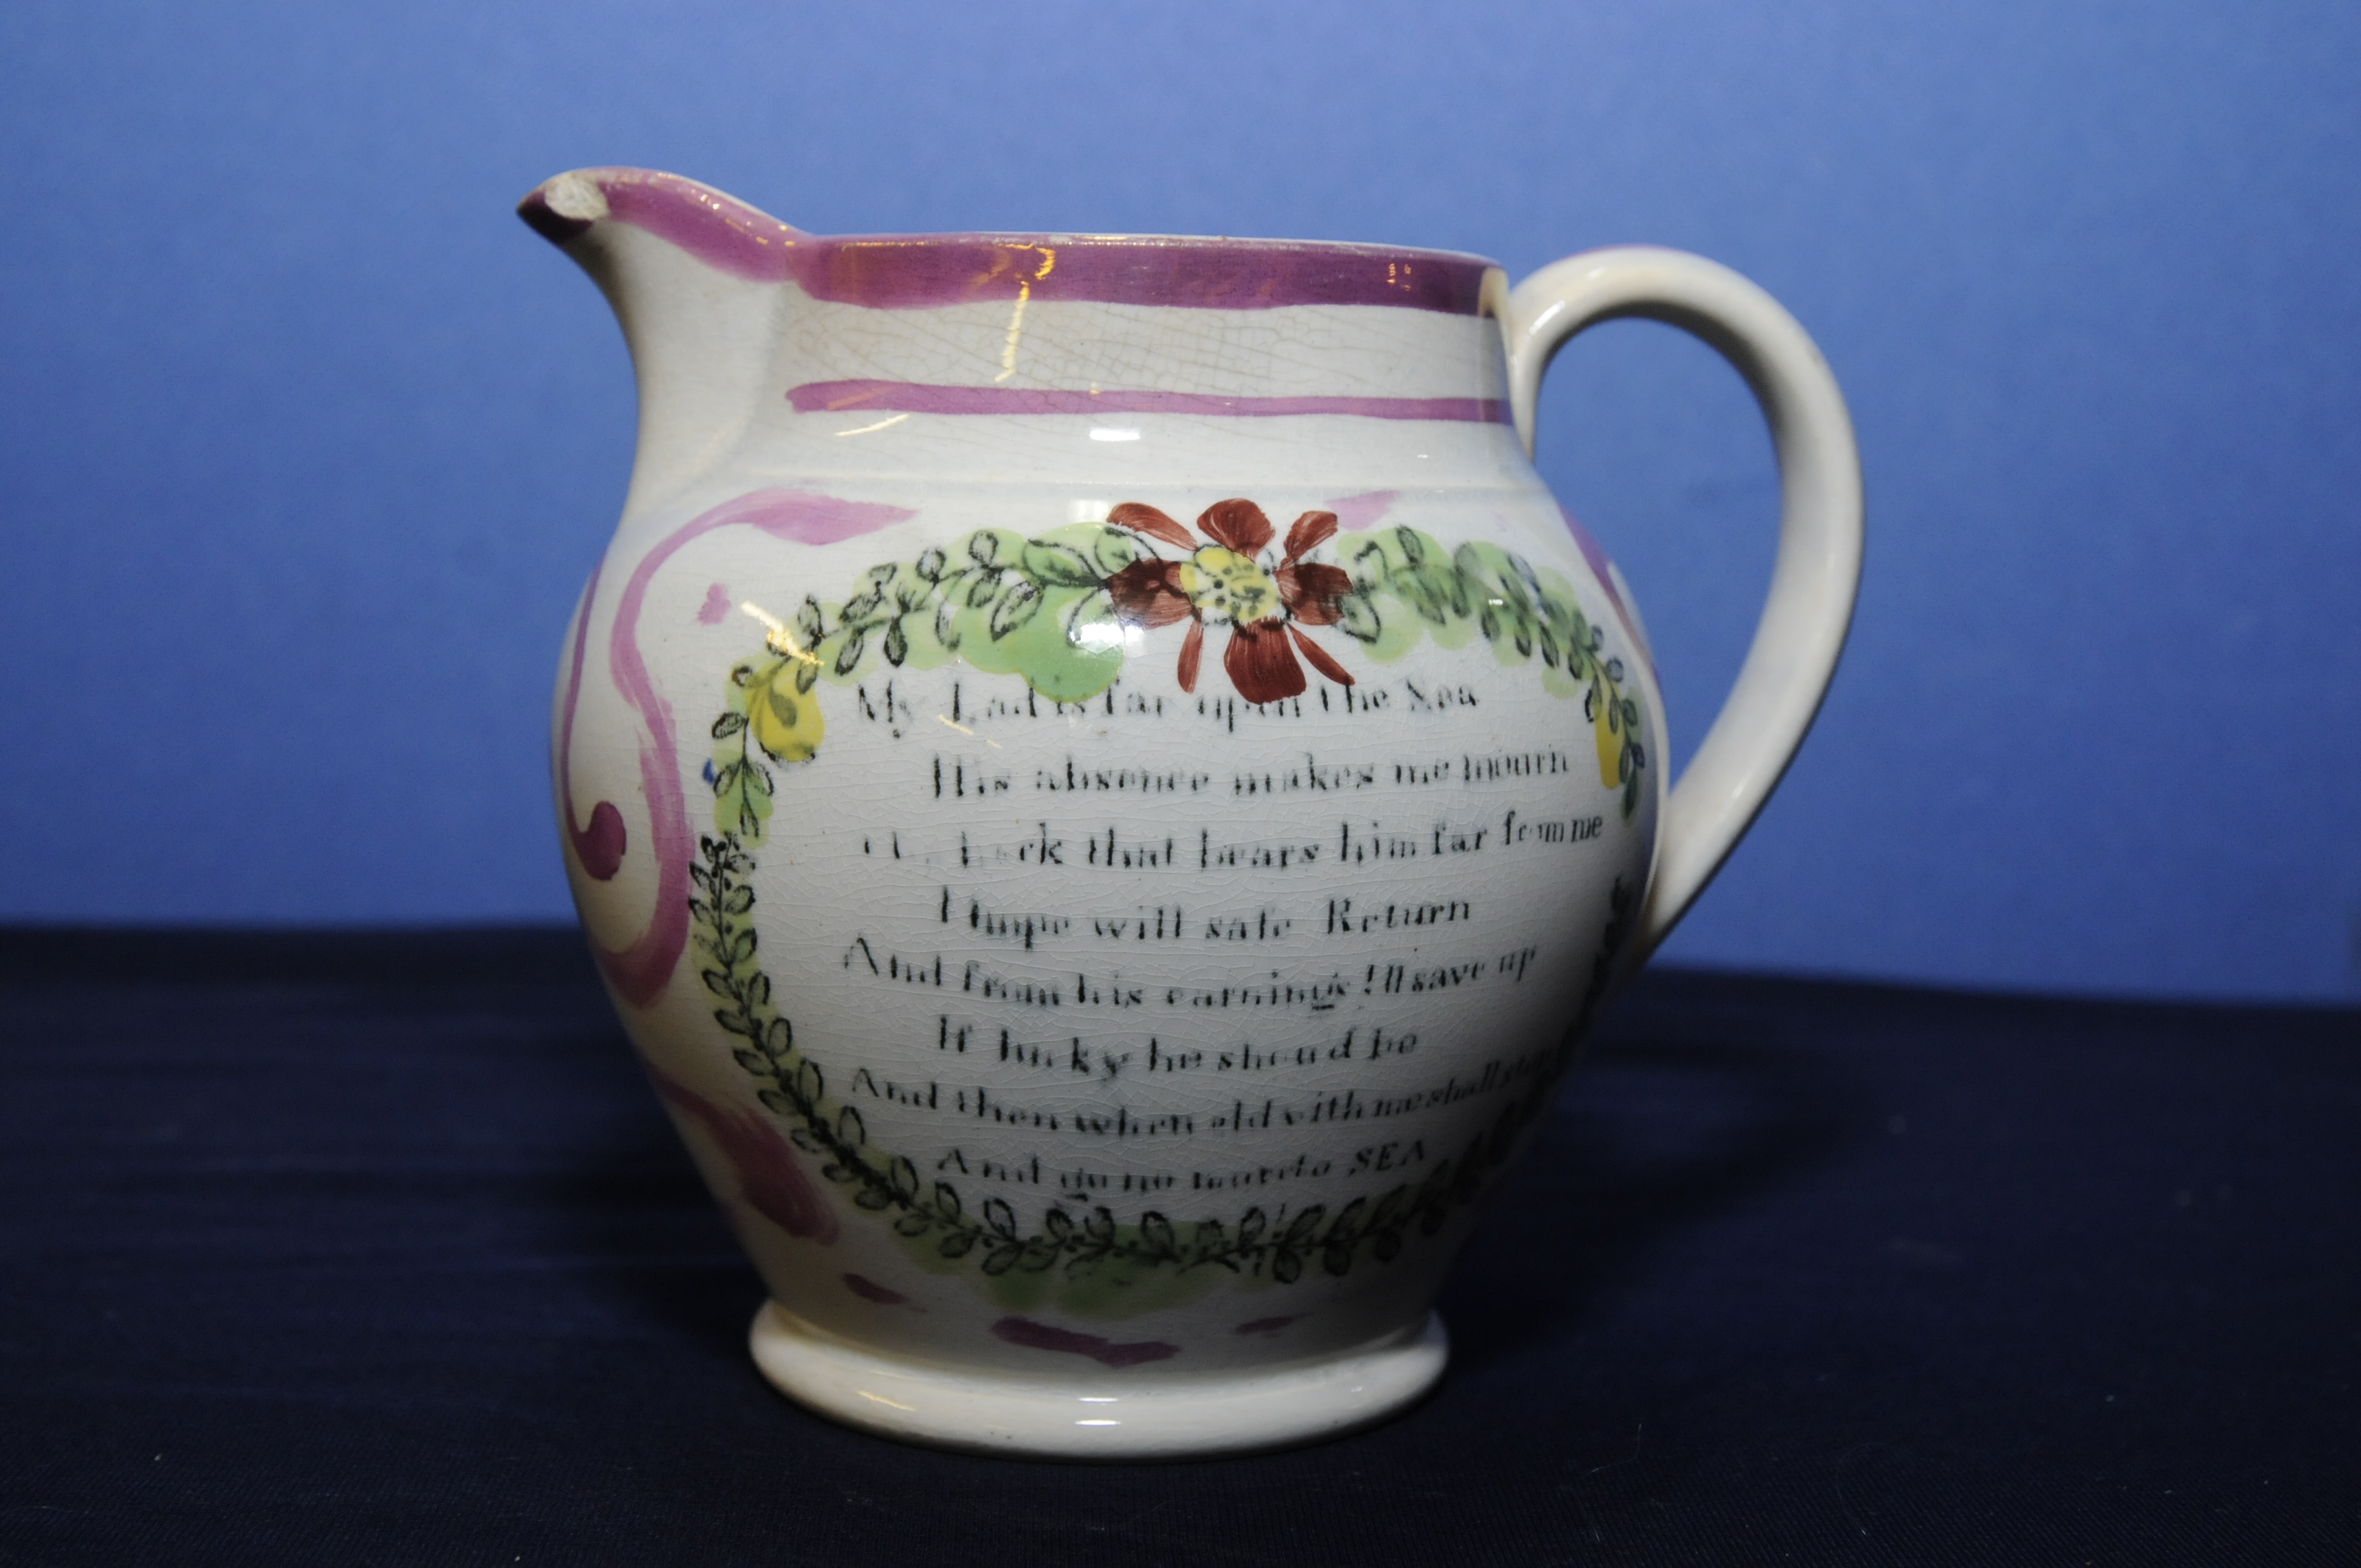 19th C Sunderland lustre jug (12cm high) with shipping scene and seafaring ditty (small chip to